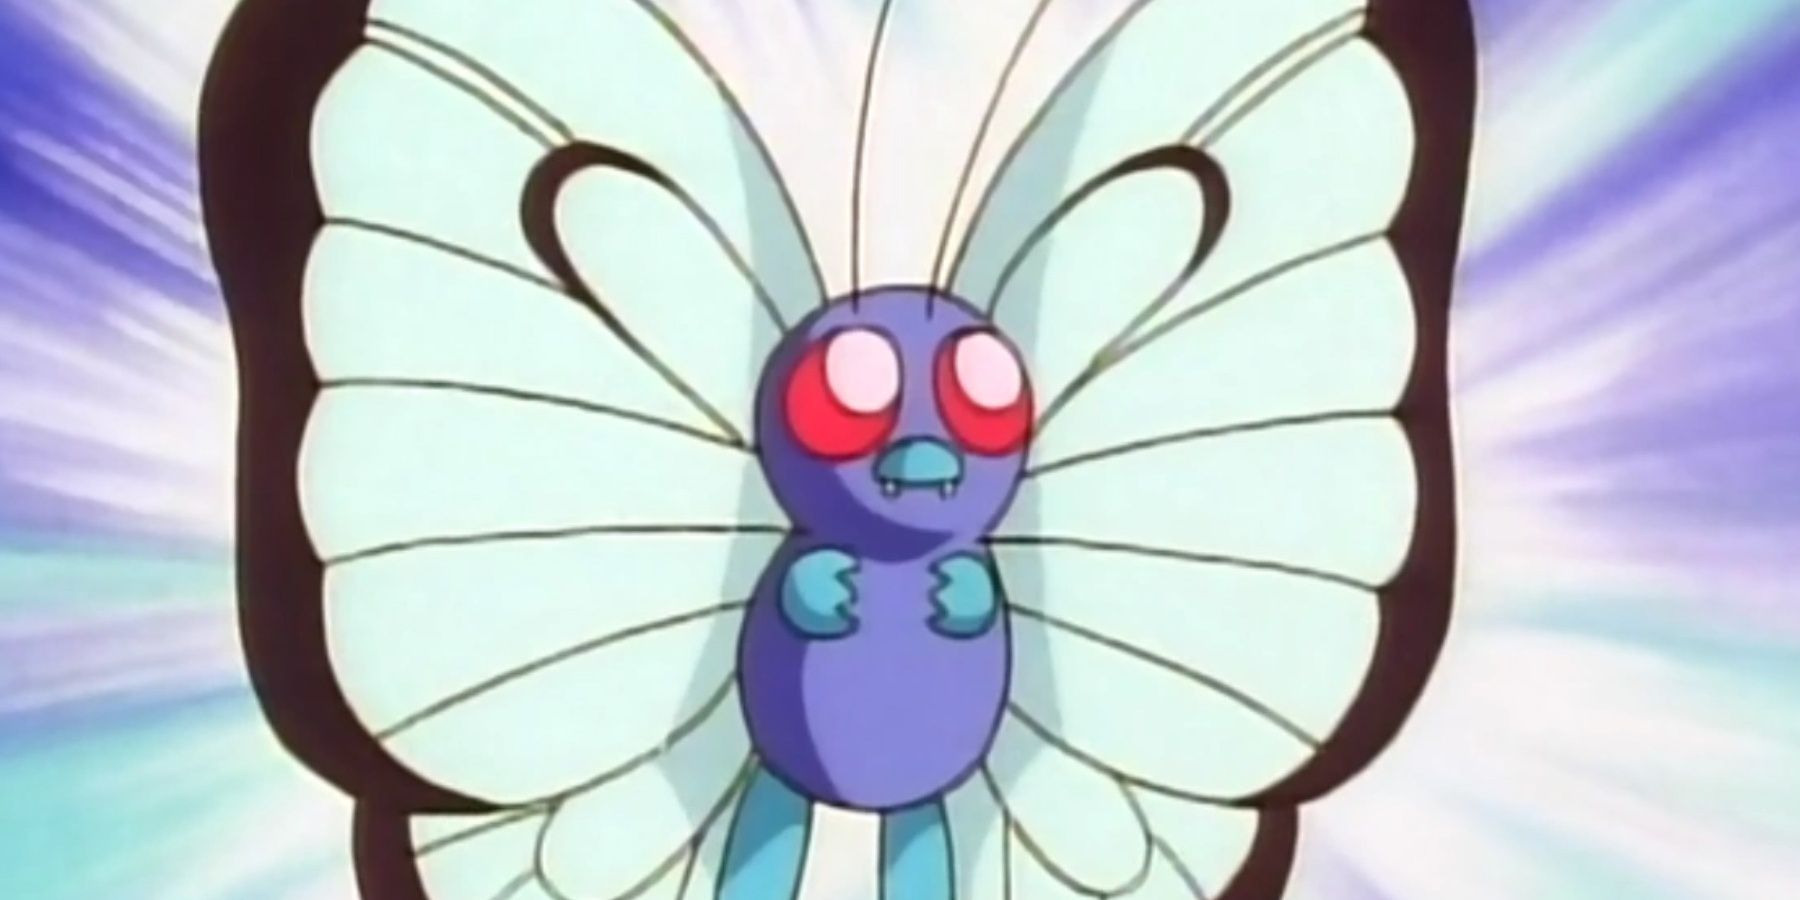 Butterfree looking worried in the Pokemon anime.